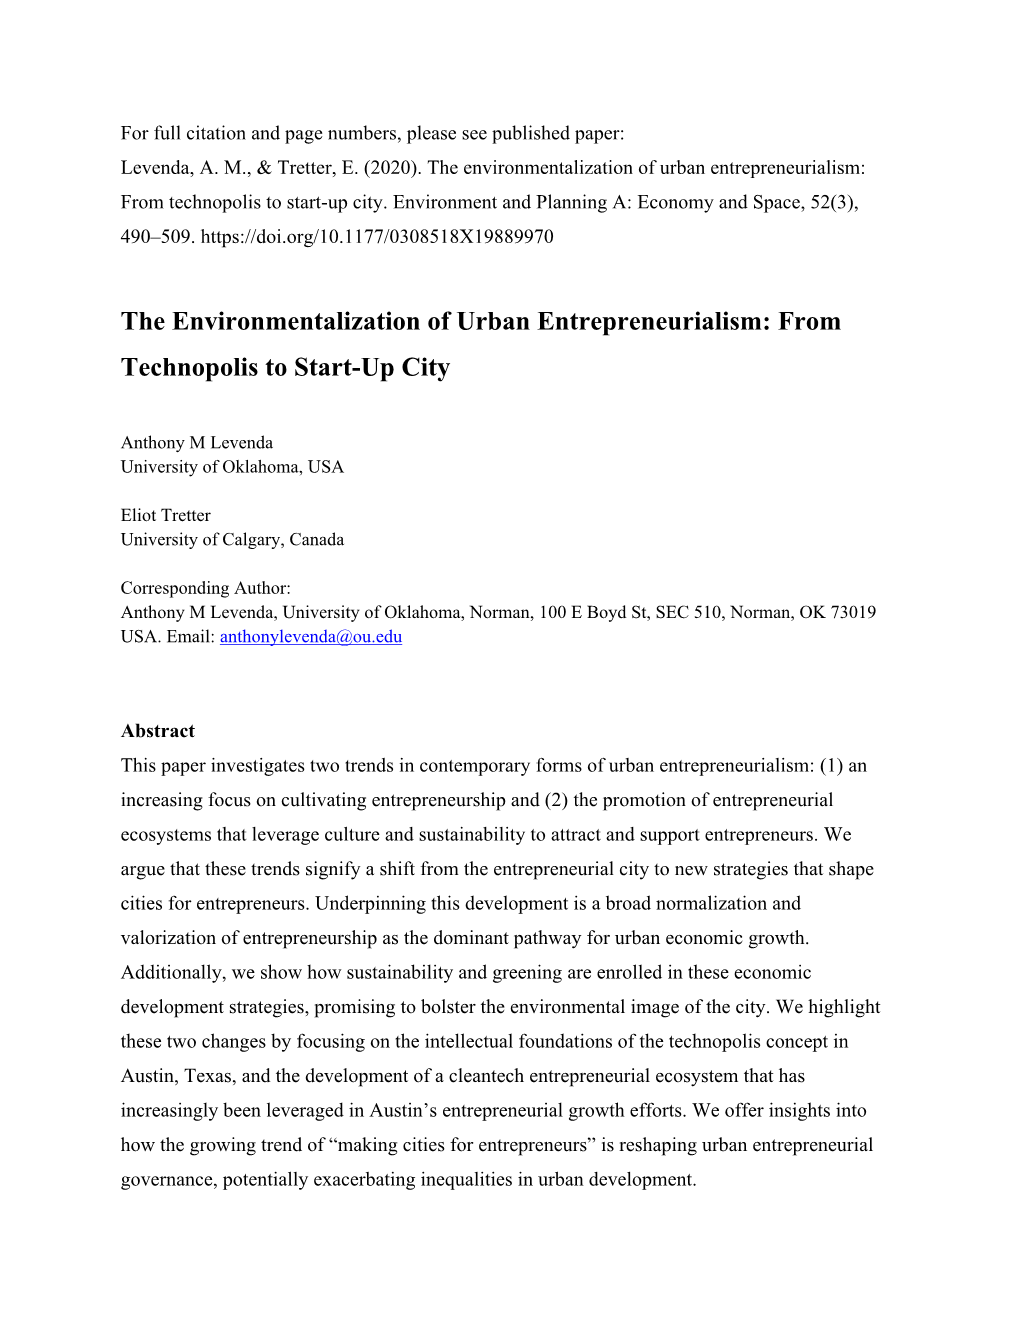 The Environmentalization of Urban Entrepreneurialism: from Technopolis to Start-Up City